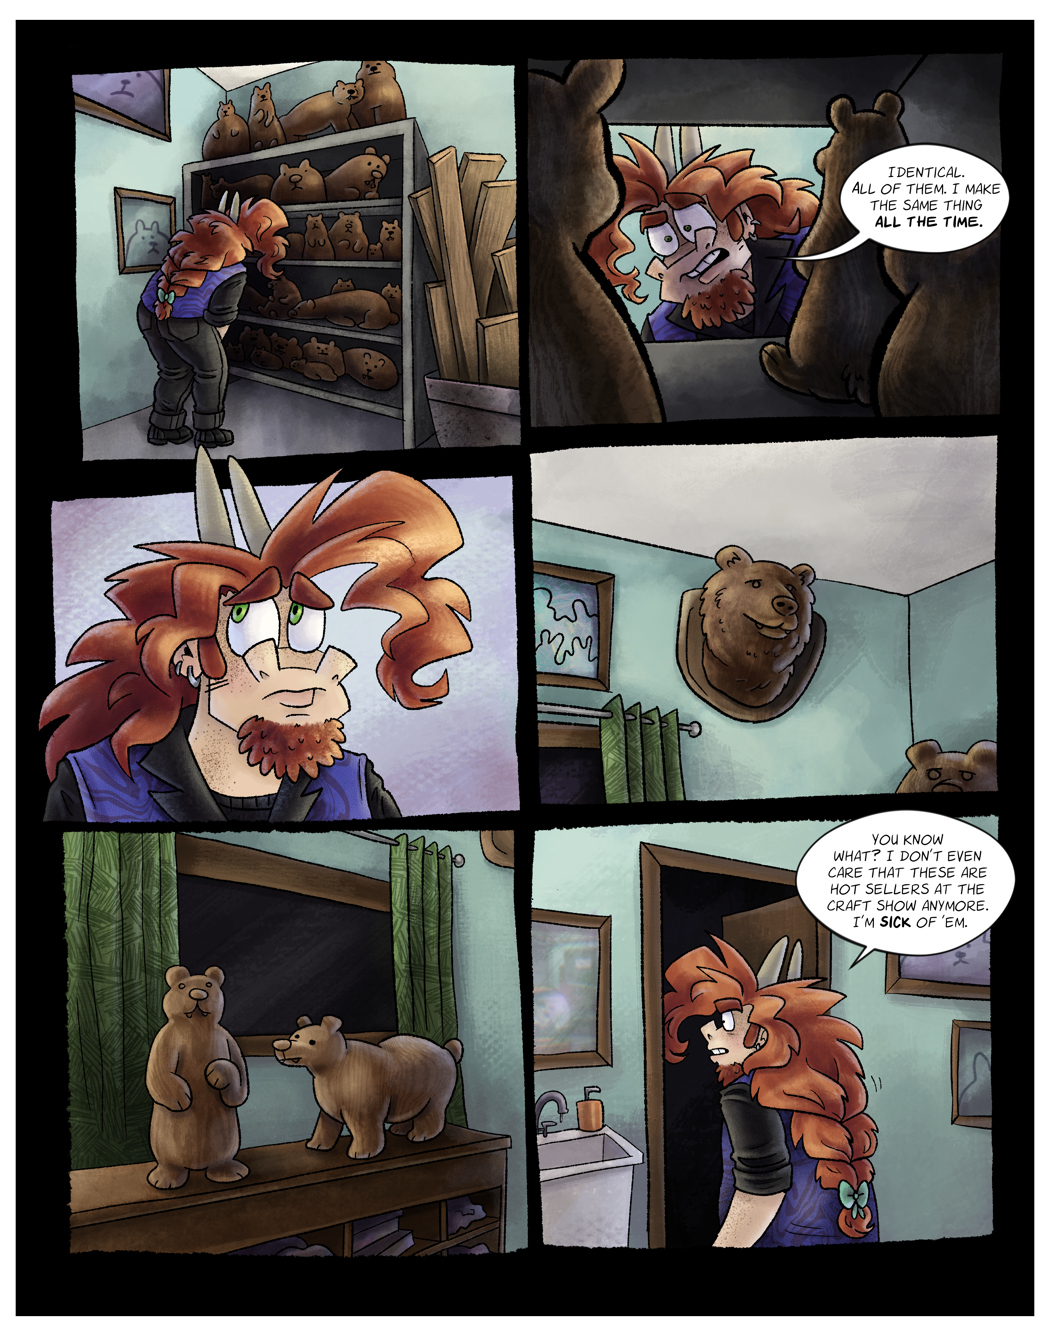 Chapter 3 Page 3: Creative Block